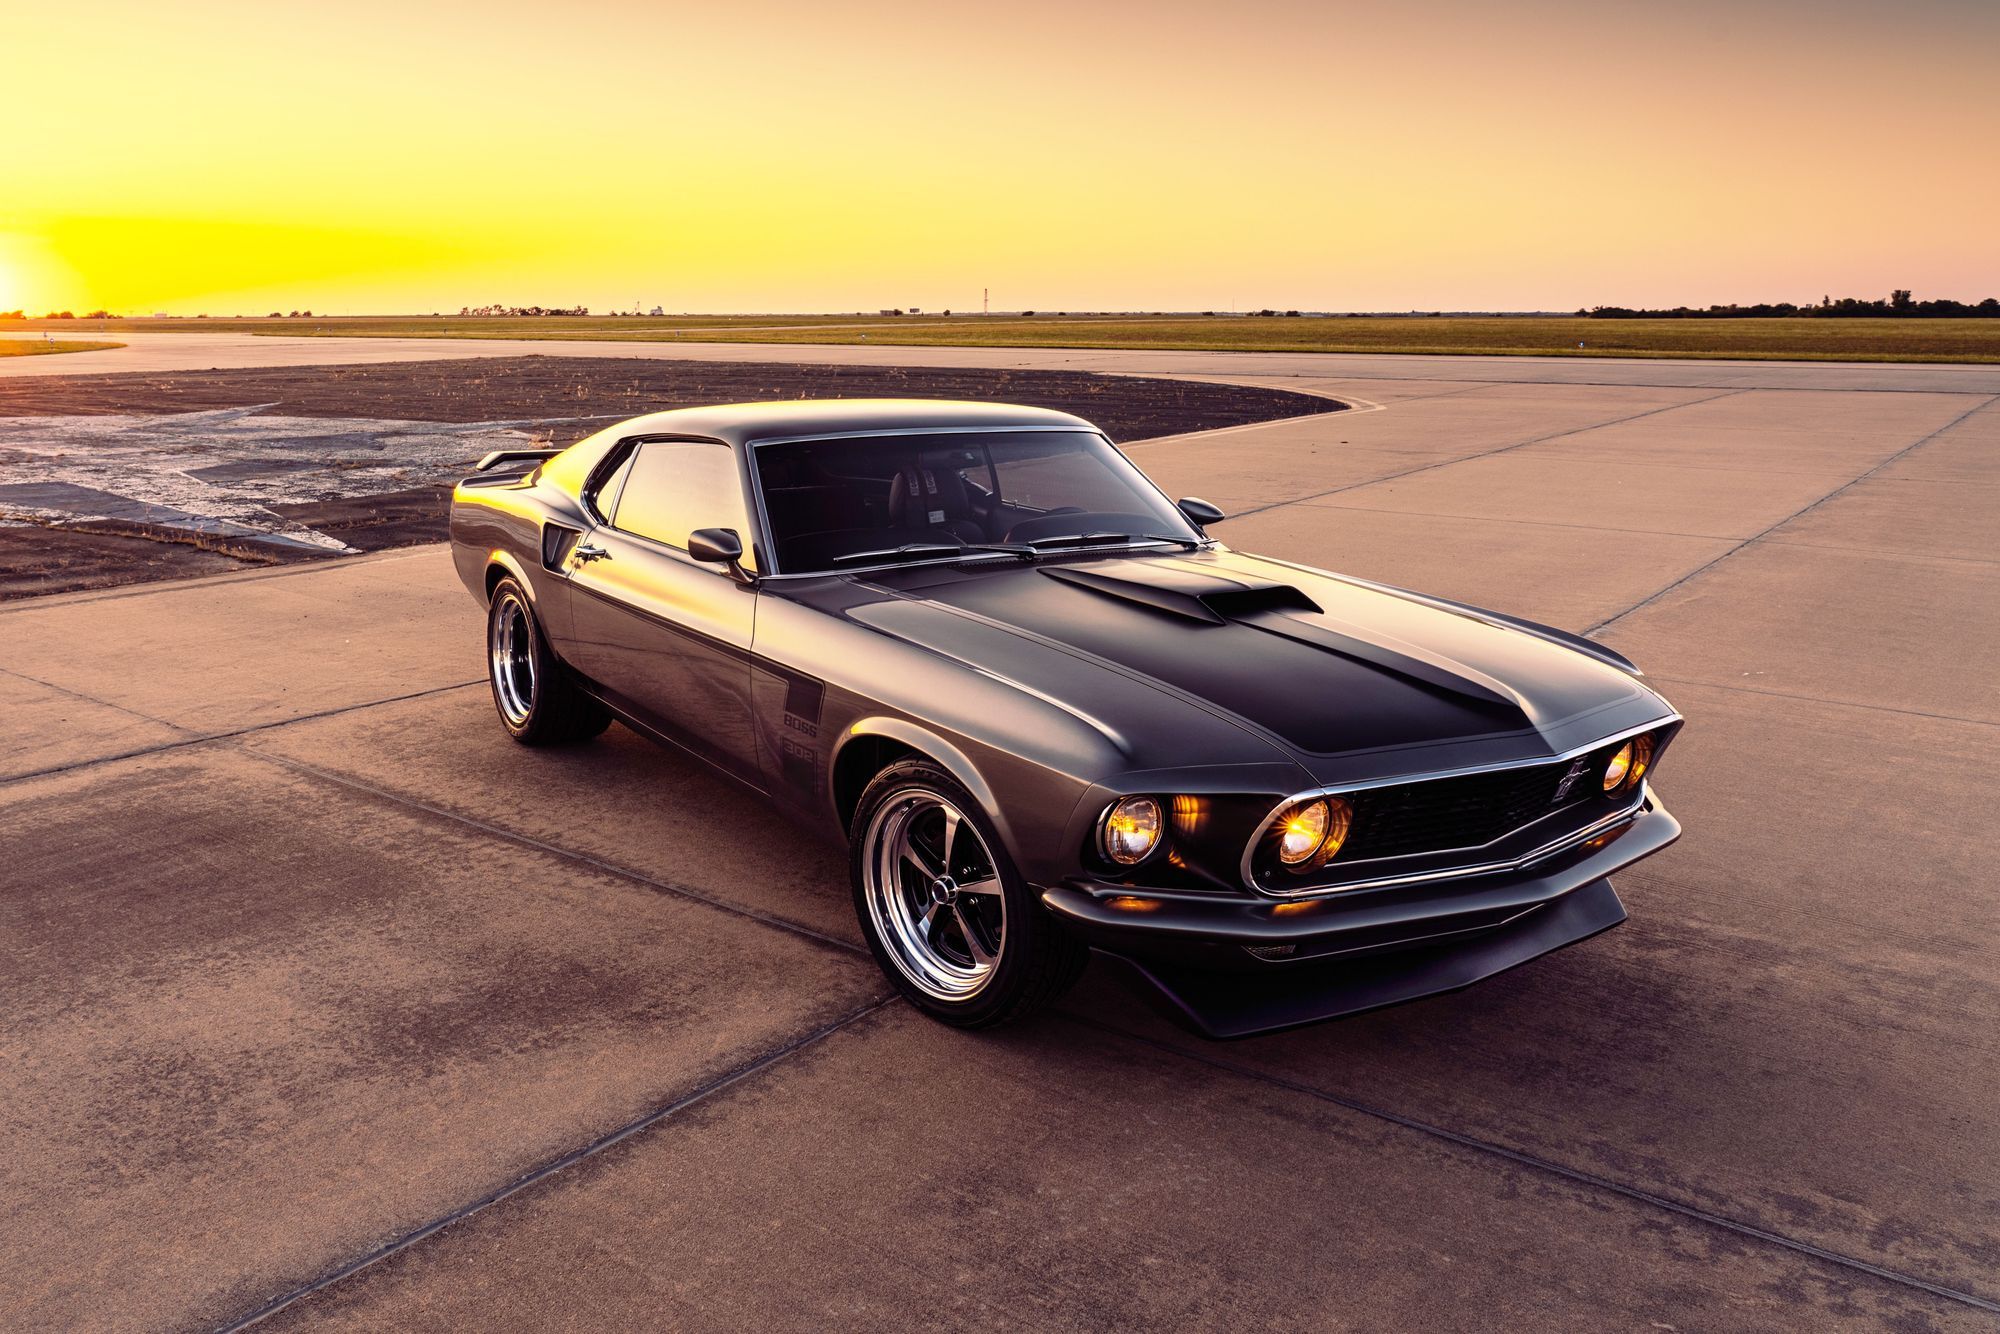 1969 Ford Mustang Boss 351